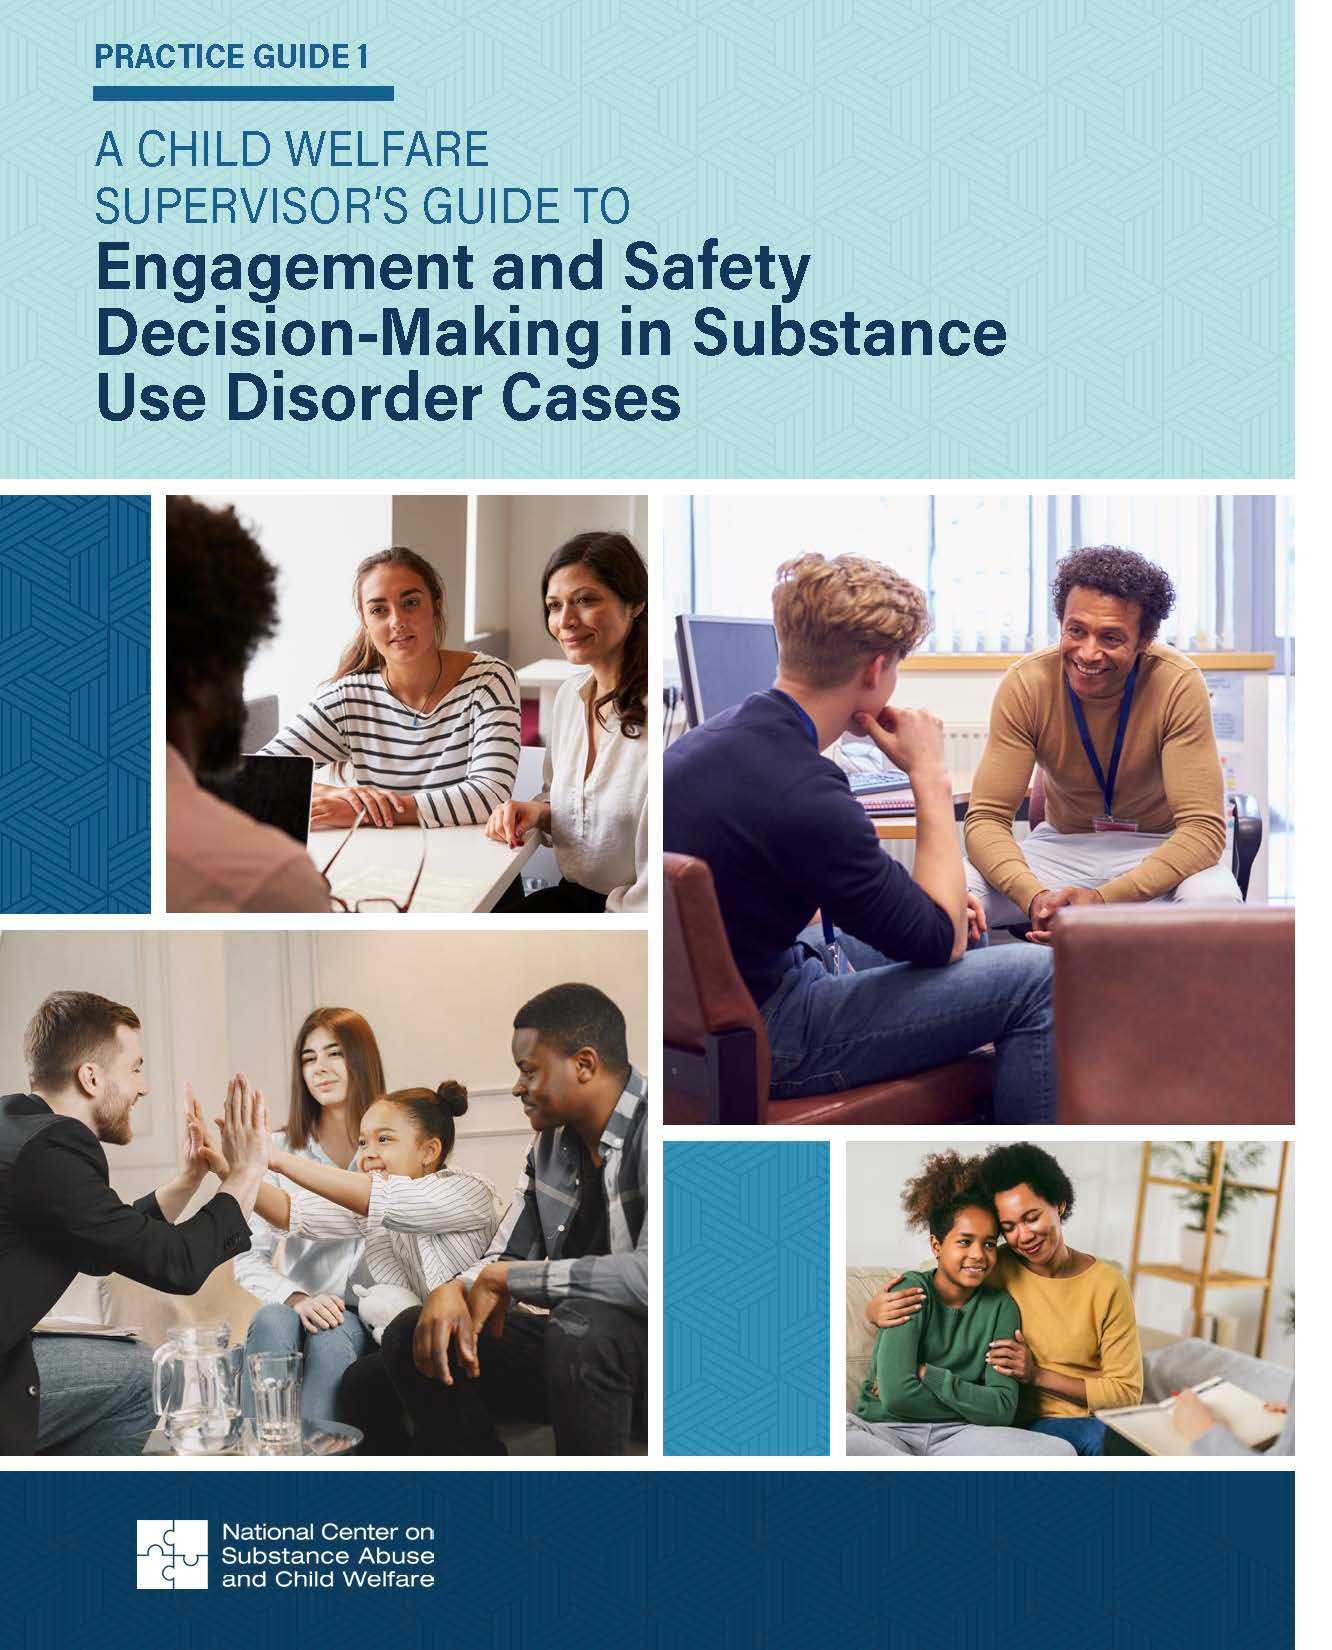 Practice Guide 1: A Child Welfare Supervisor’s Guide to Engagement and Safety Decision-Making in Substance Use Disorder Cases